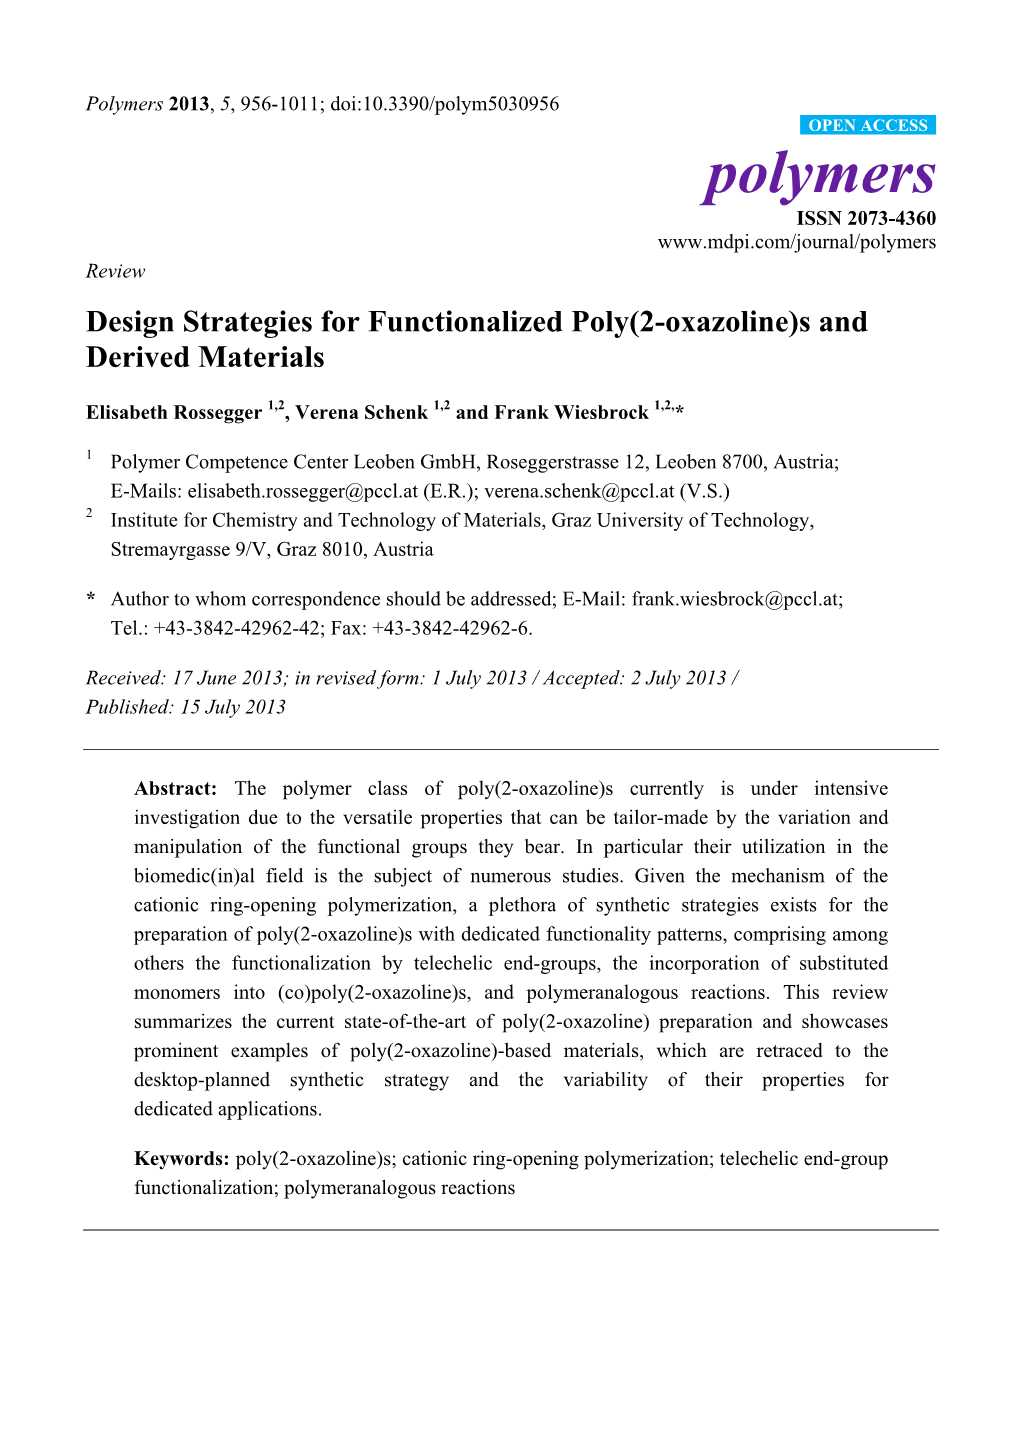 Design Strategies for Functionalized Poly(2-Oxazoline)S and Derived Materials